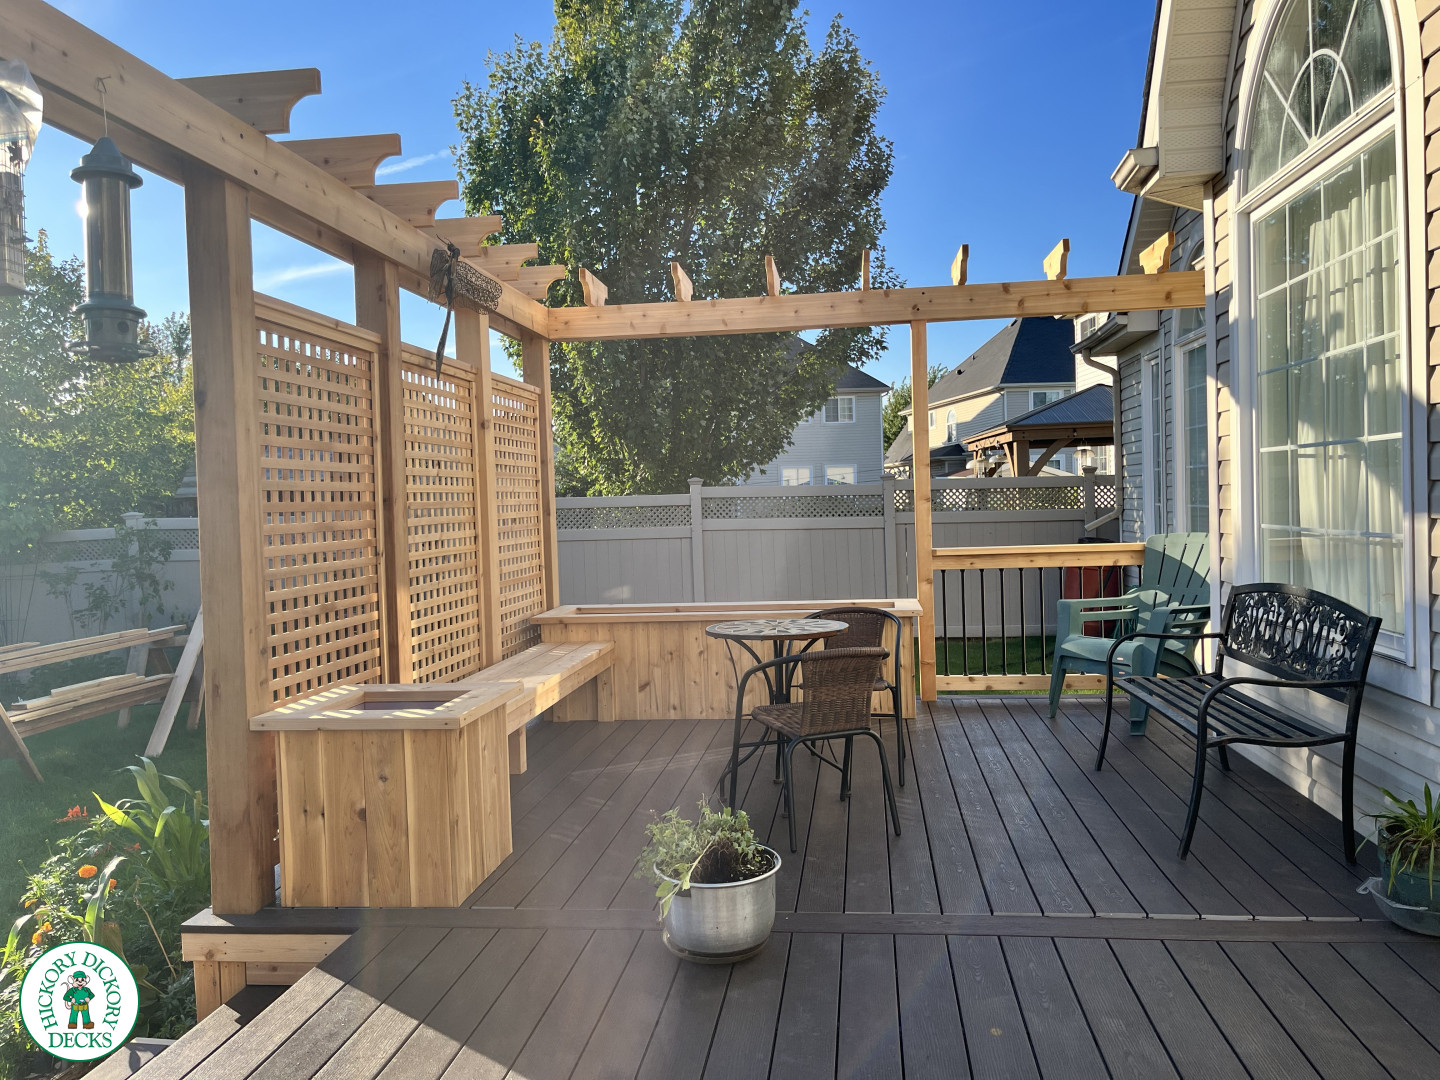 Mid size clubhouse deck in brown with cedar skirt, benches, planters, and a pergola.